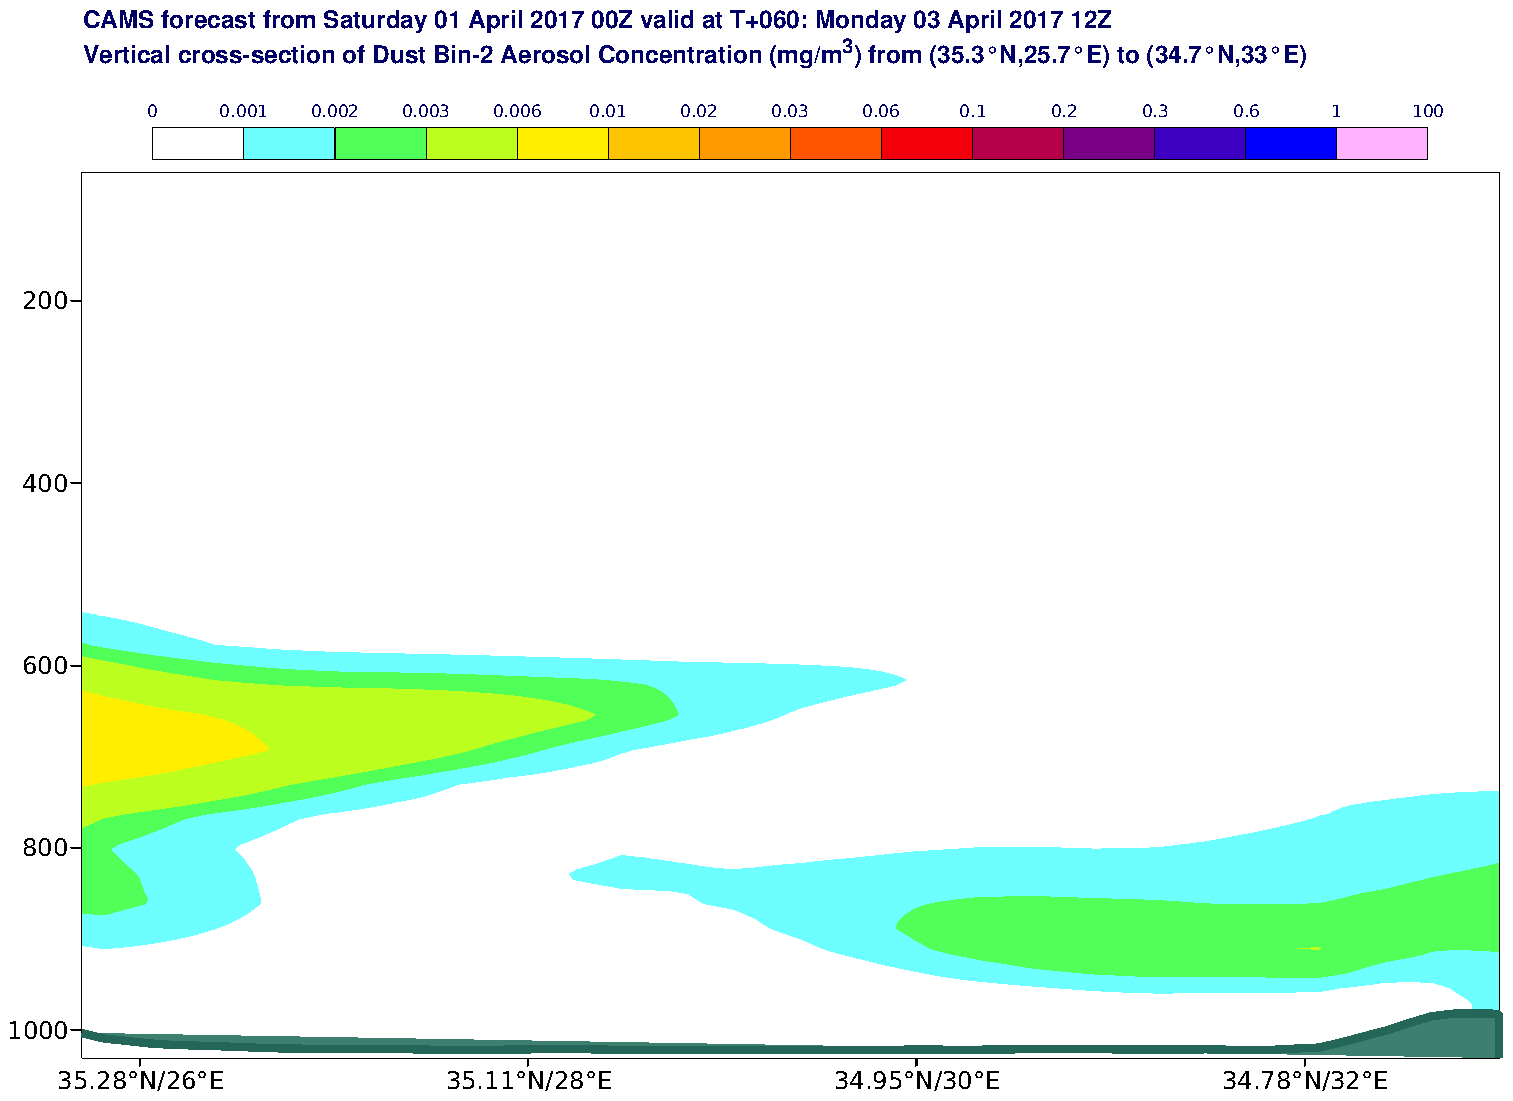 Vertical cross-section of Dust Bin-2 Aerosol Concentration (mg/m3) valid at T60 - 2017-04-03 12:00